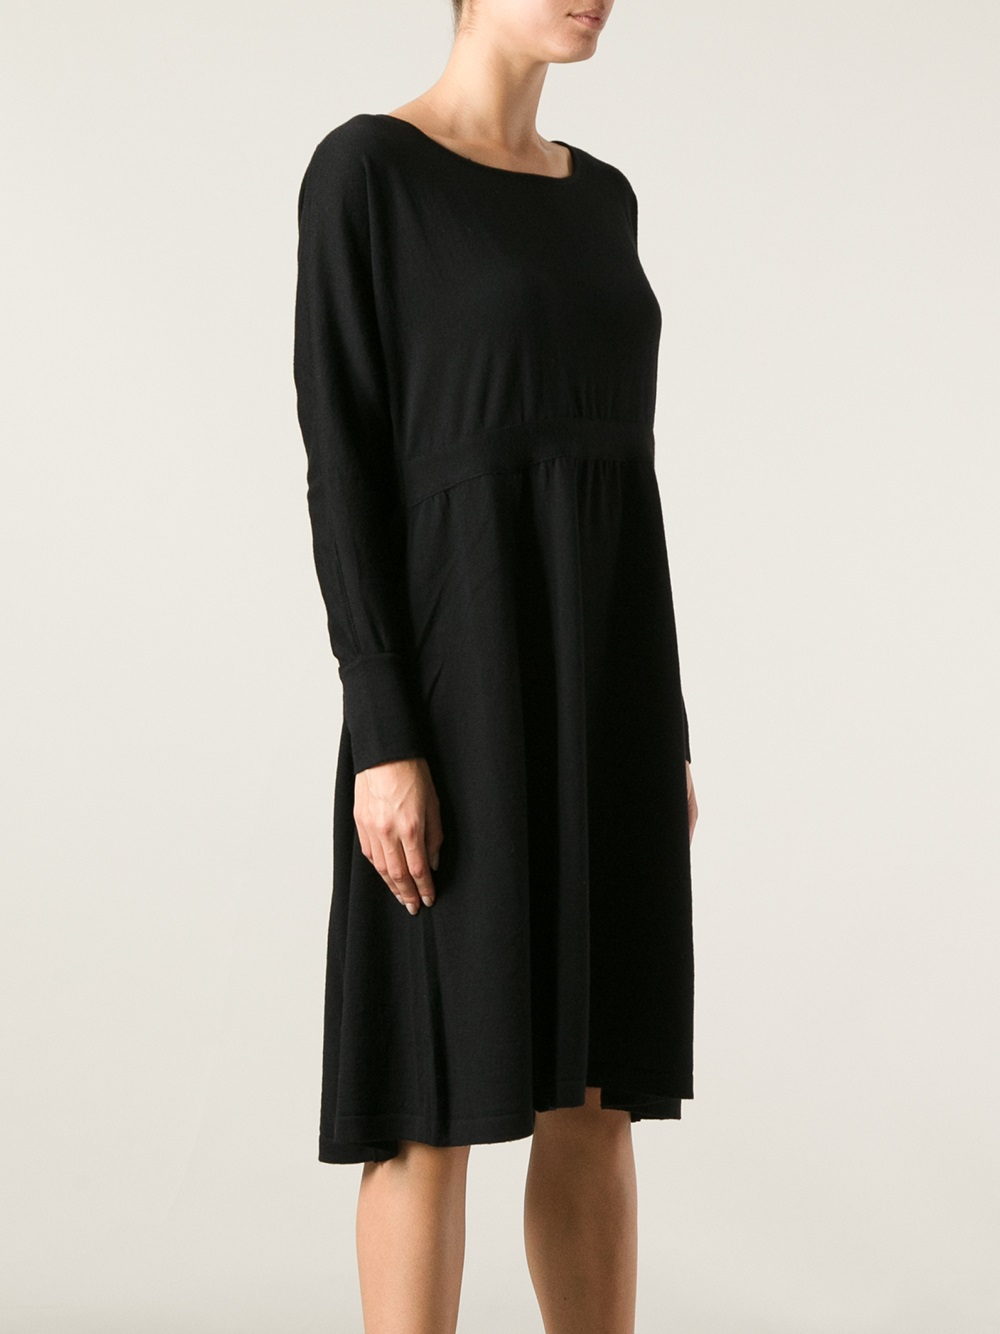 Lyst - Societe Anonyme Loose Fit Sweater Dress in Black